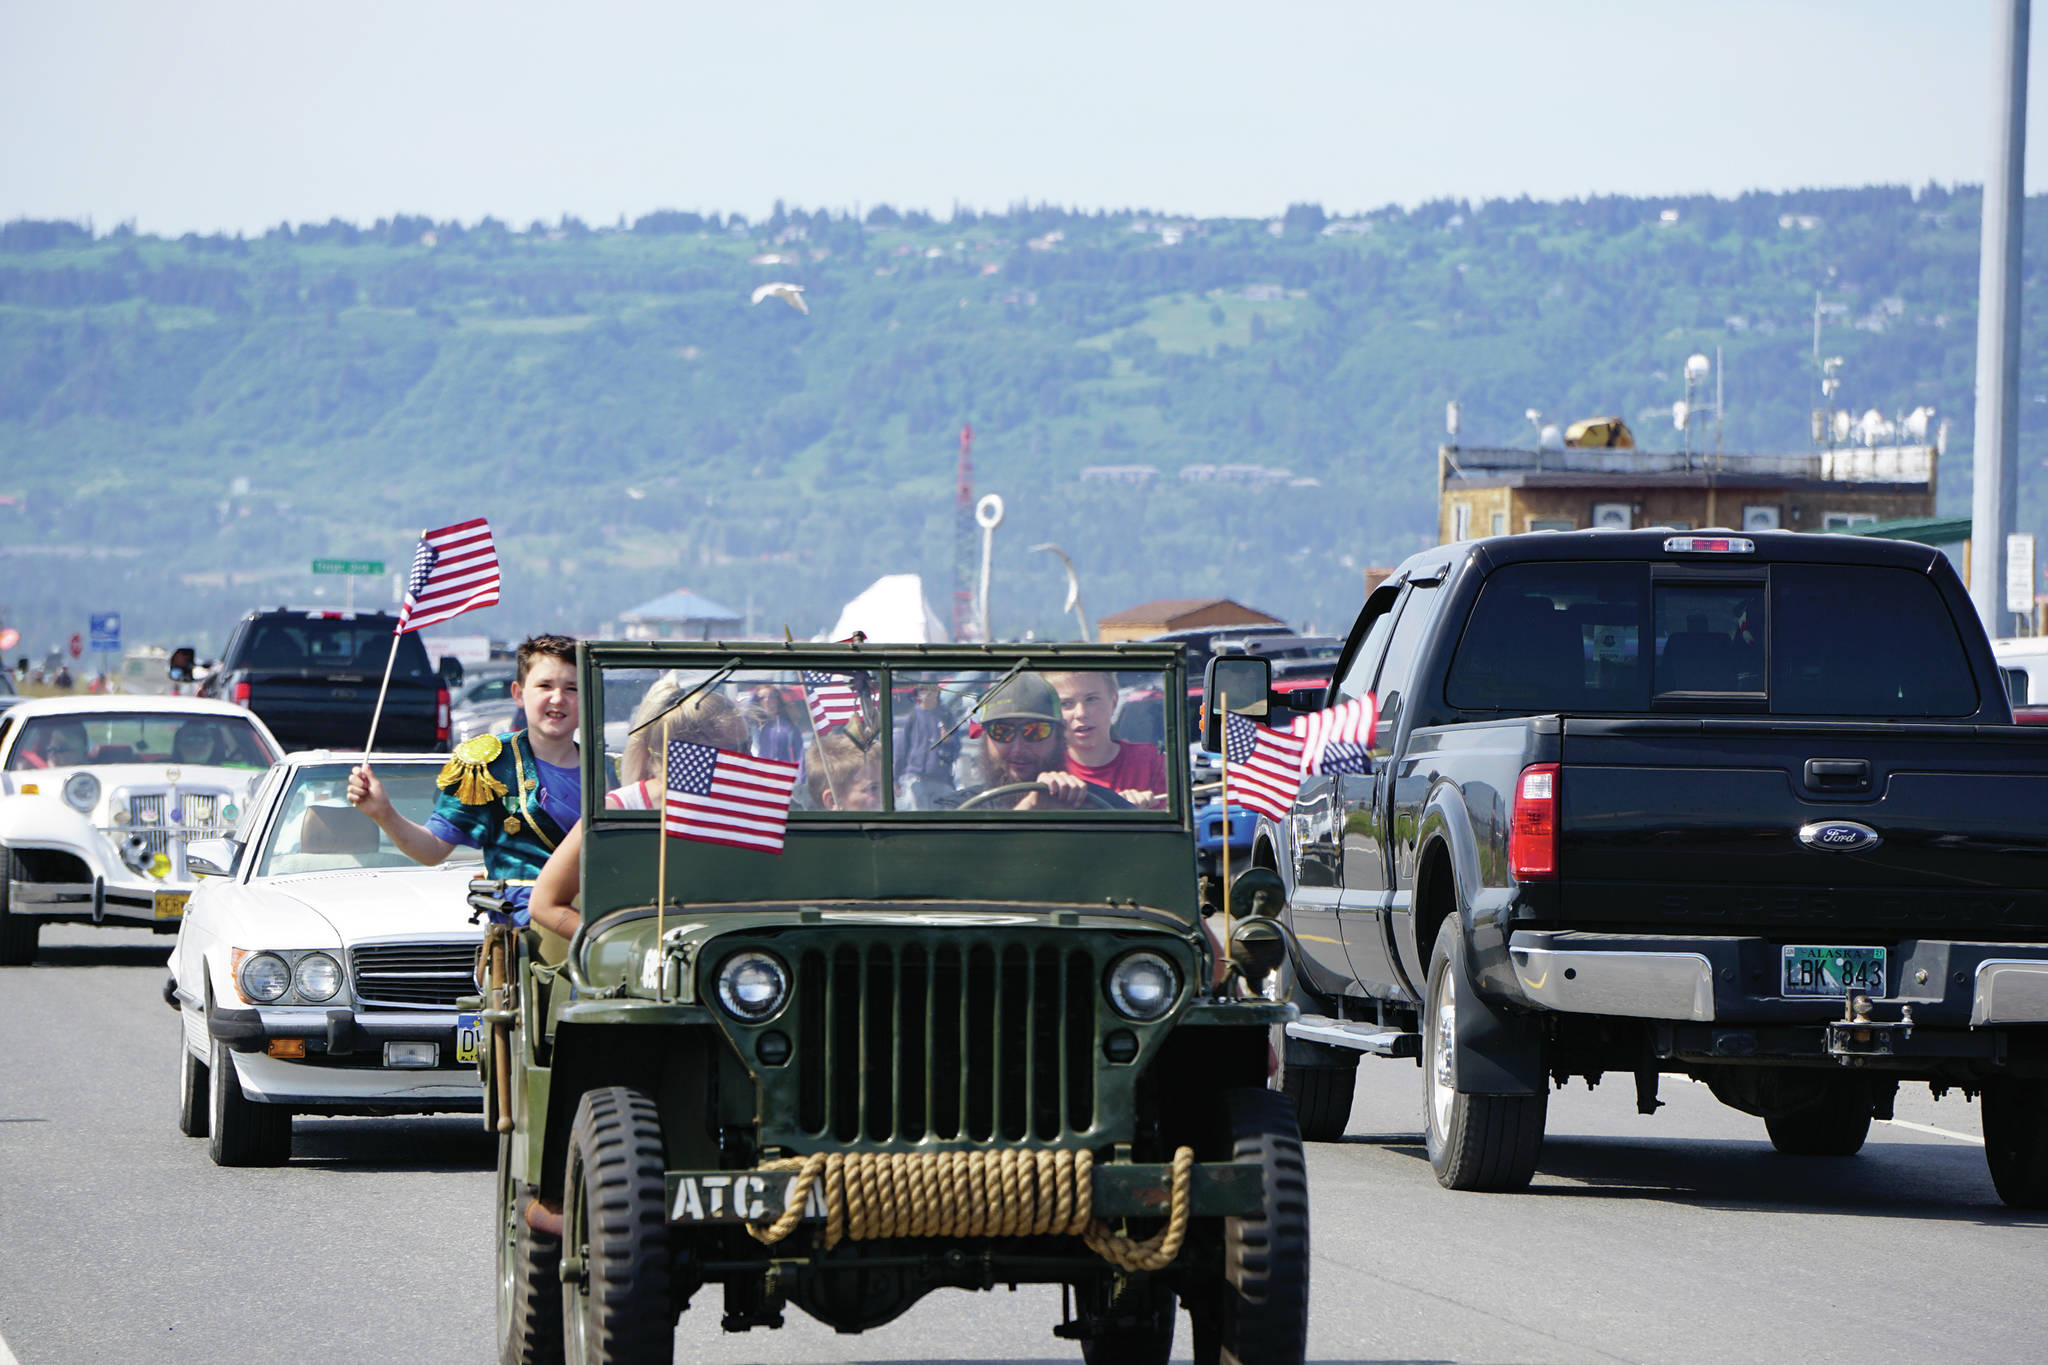 A historic military Jeep is part of a group of classic vehicles that did a cruise around Homer on Saturday, July 4, 2020 through town and to the end of the Homer Spit in Homer, Alaska. (Photo by Michael Armstrong/Homer News)